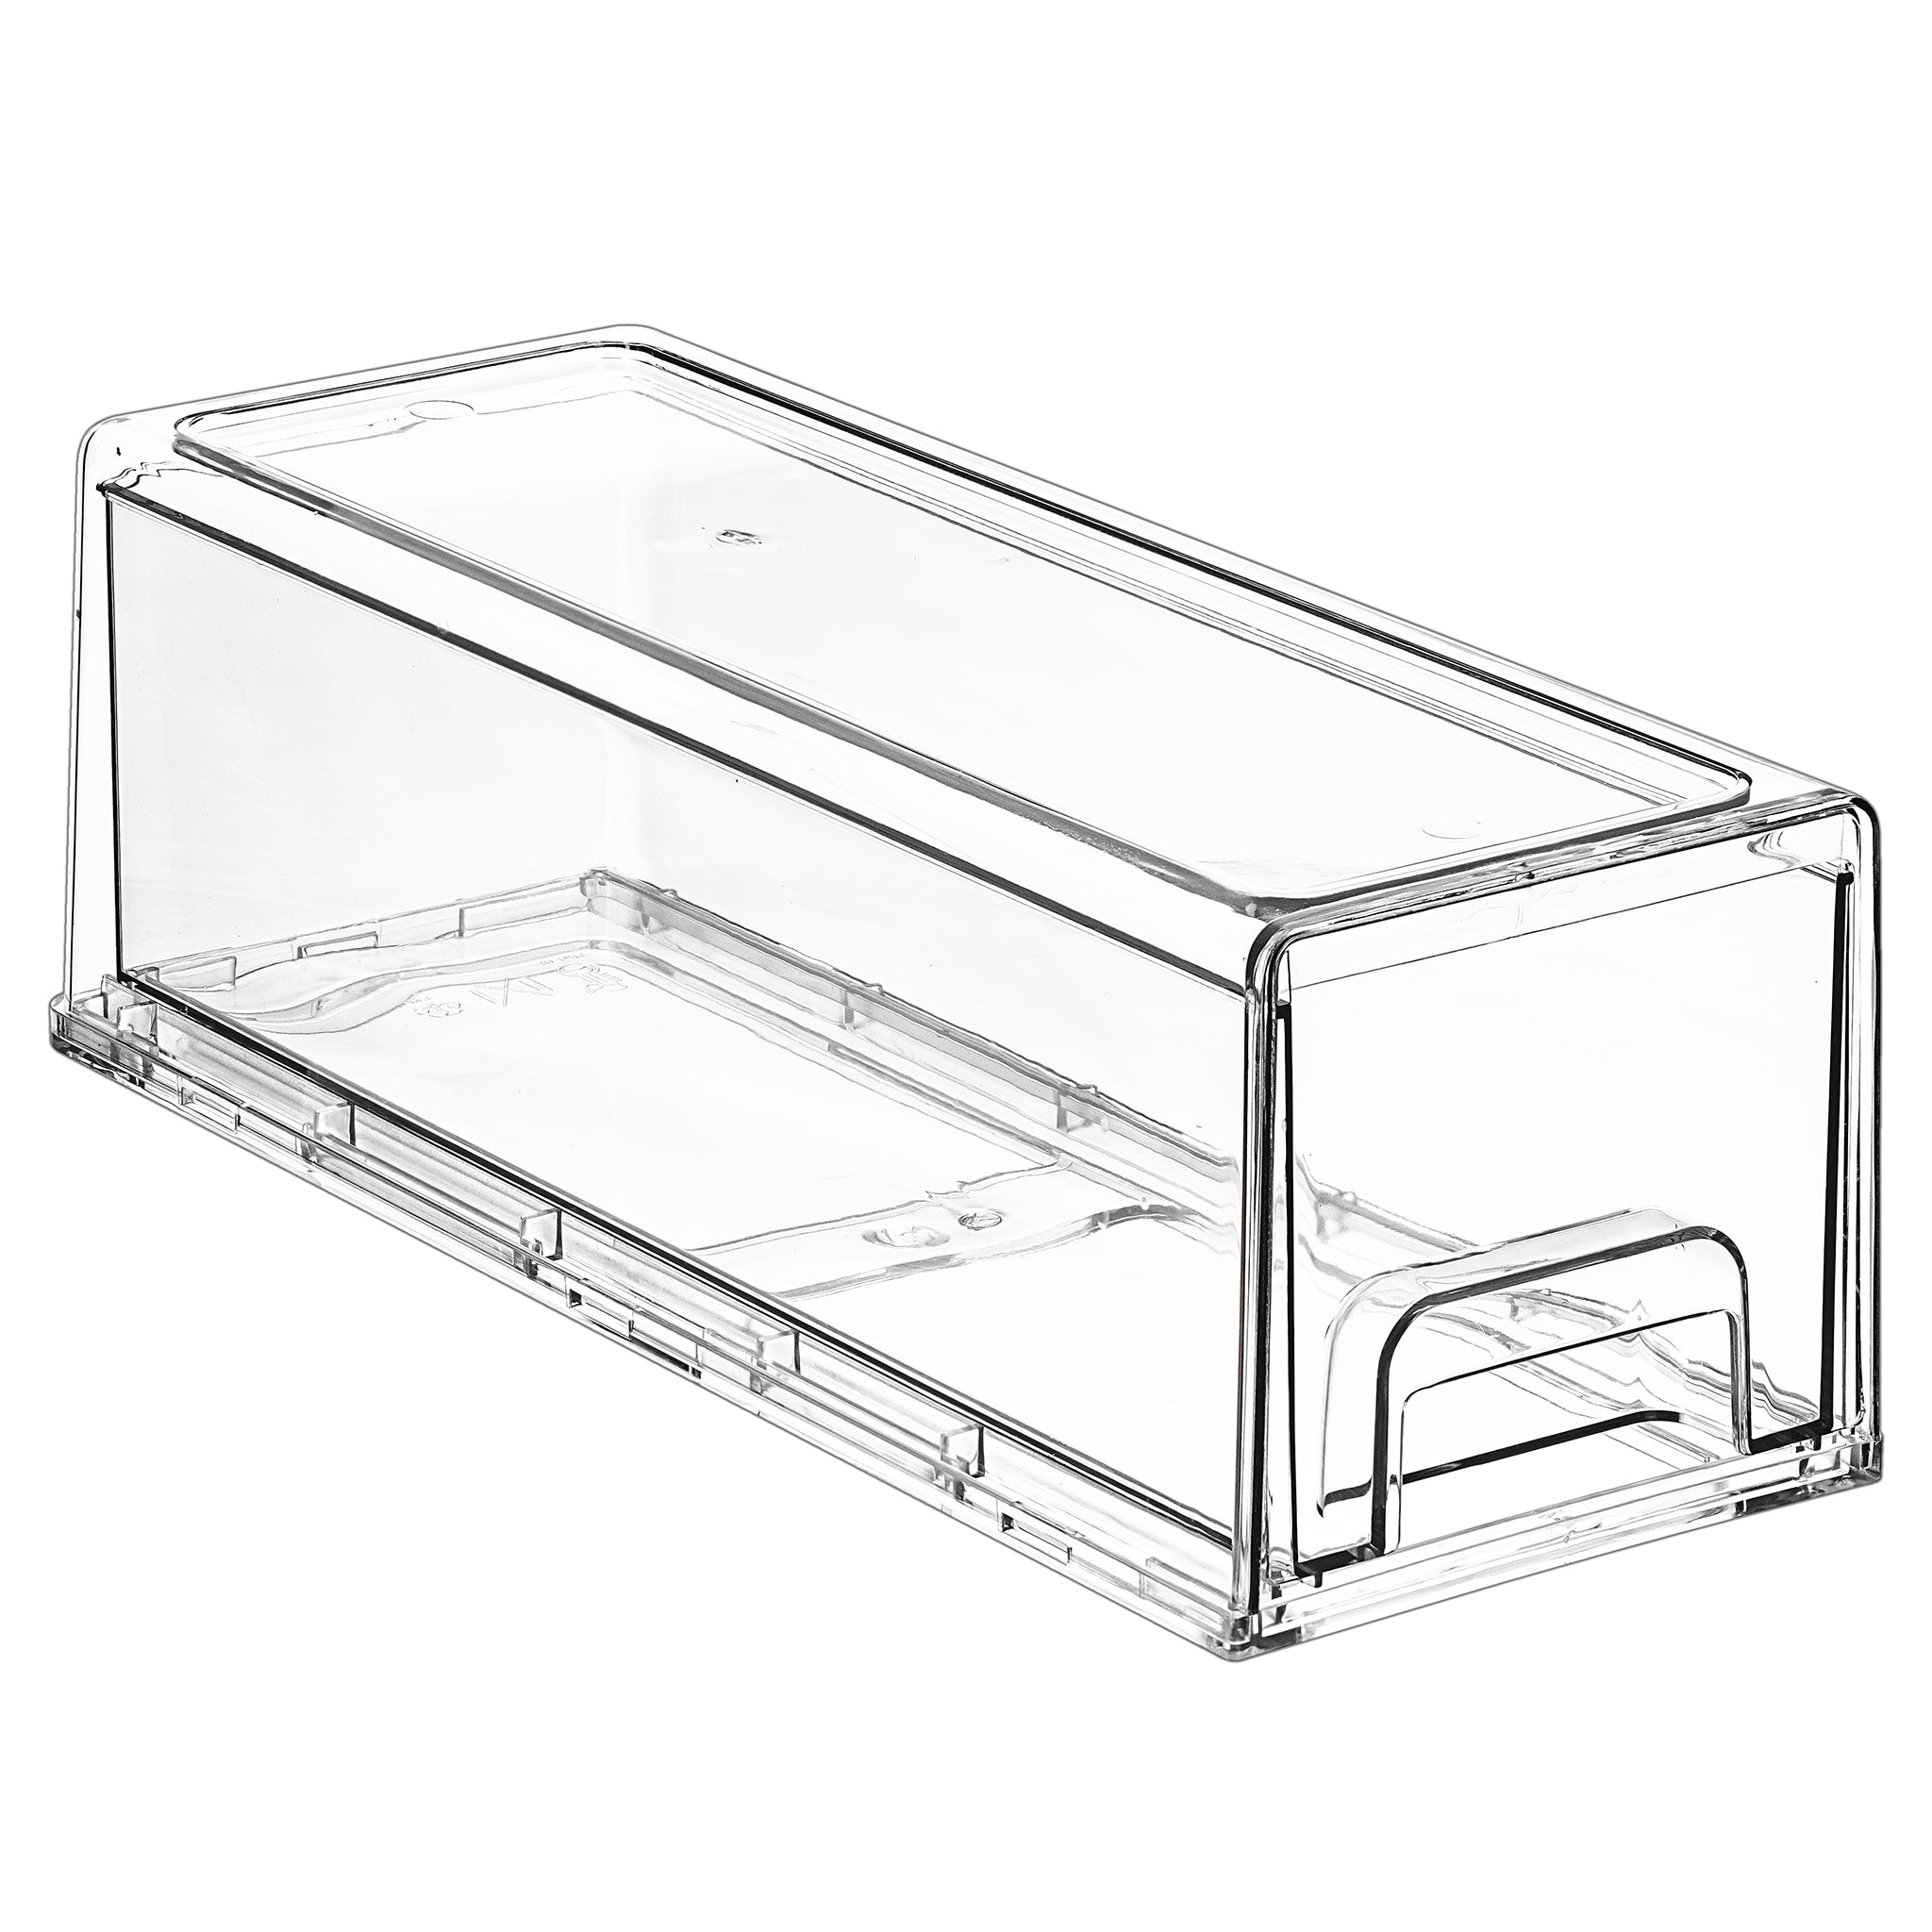 Sorbus Clear Stackable Pull-out Refrigerator Organizer Bins (2 Pack